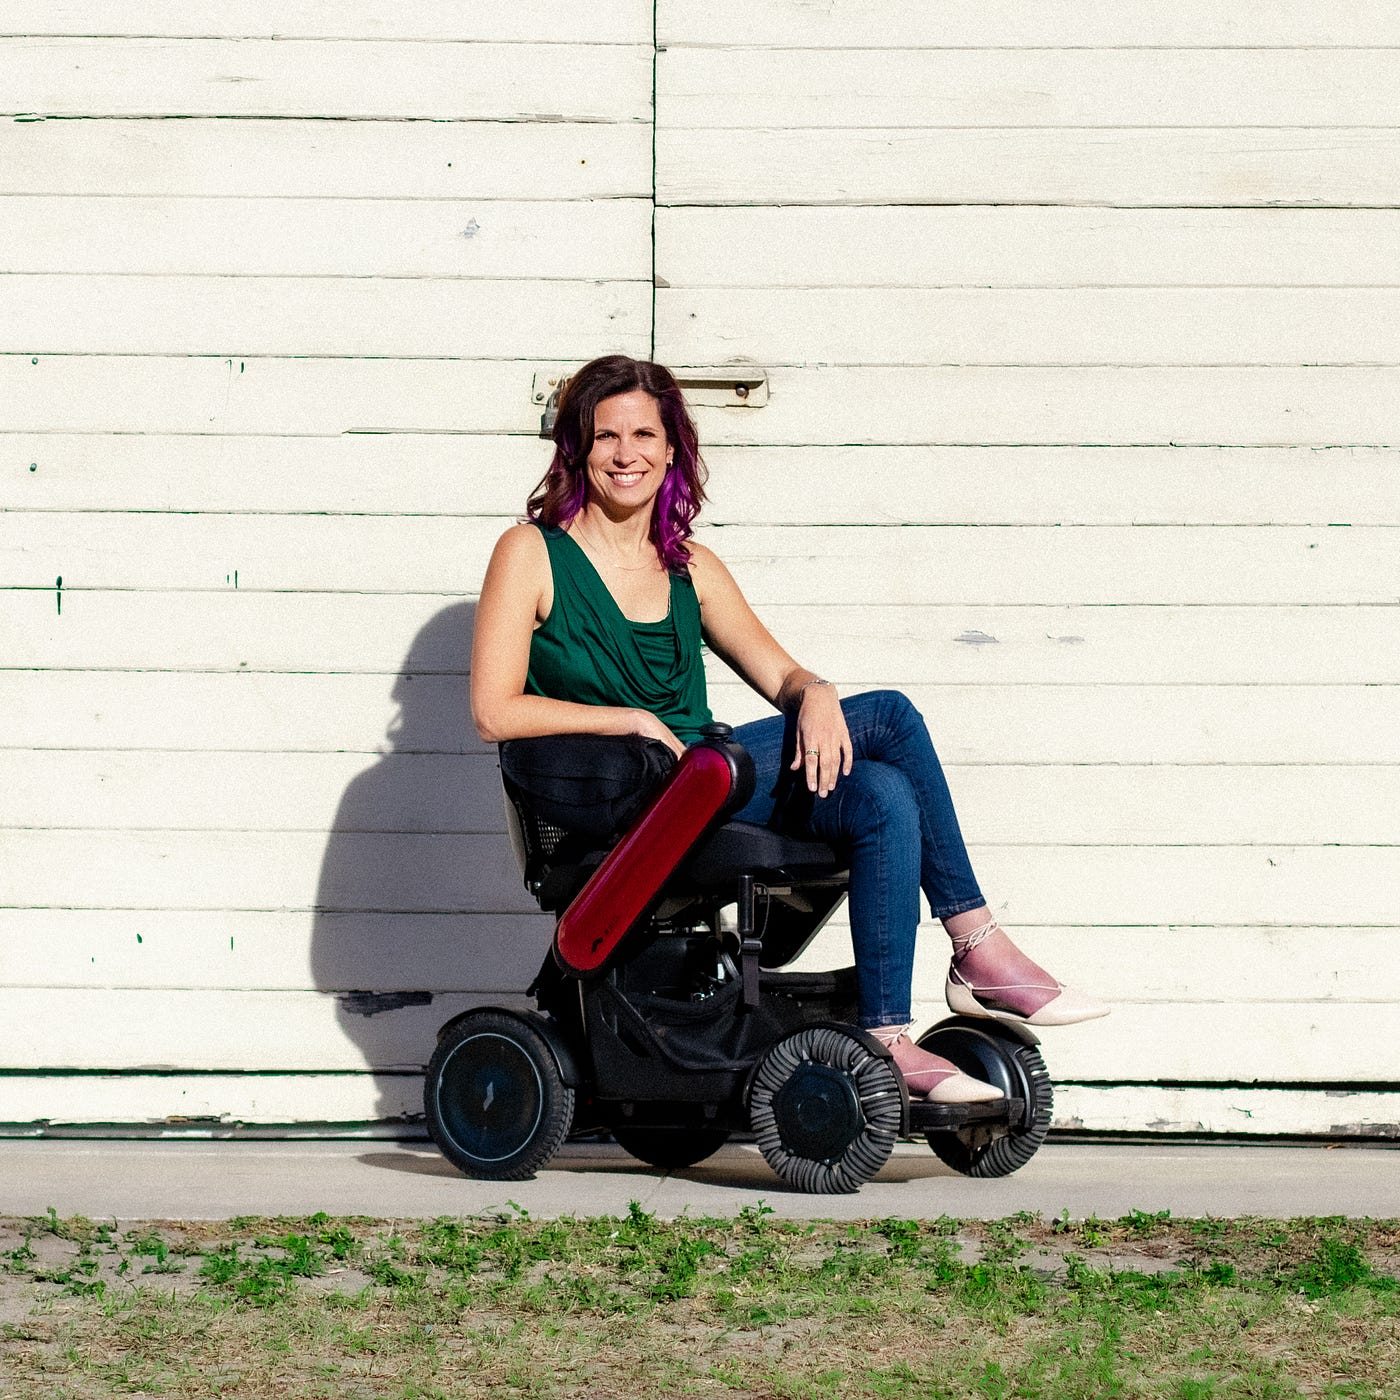 What Online Dating is Really Like for Women in Wheelchairs by Sylvia Longmire Medium pic